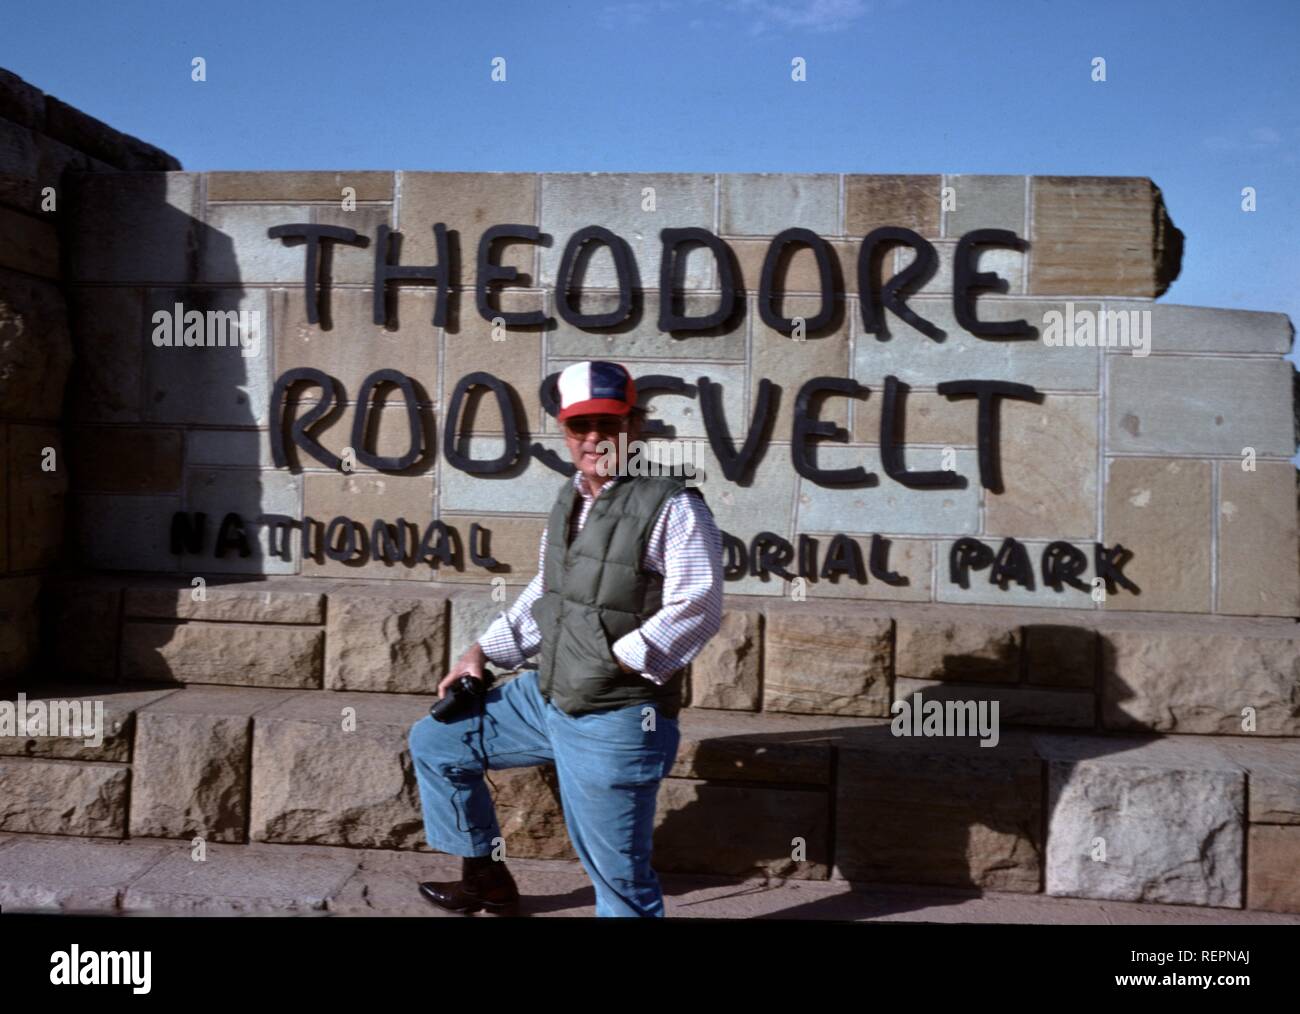 A man wearing a vest and hat and holding a camera stands with one leg up on the sign for Theodore Roosevelt National Memorial Park in Medora, North Dakota, 1976. () Stock Photo